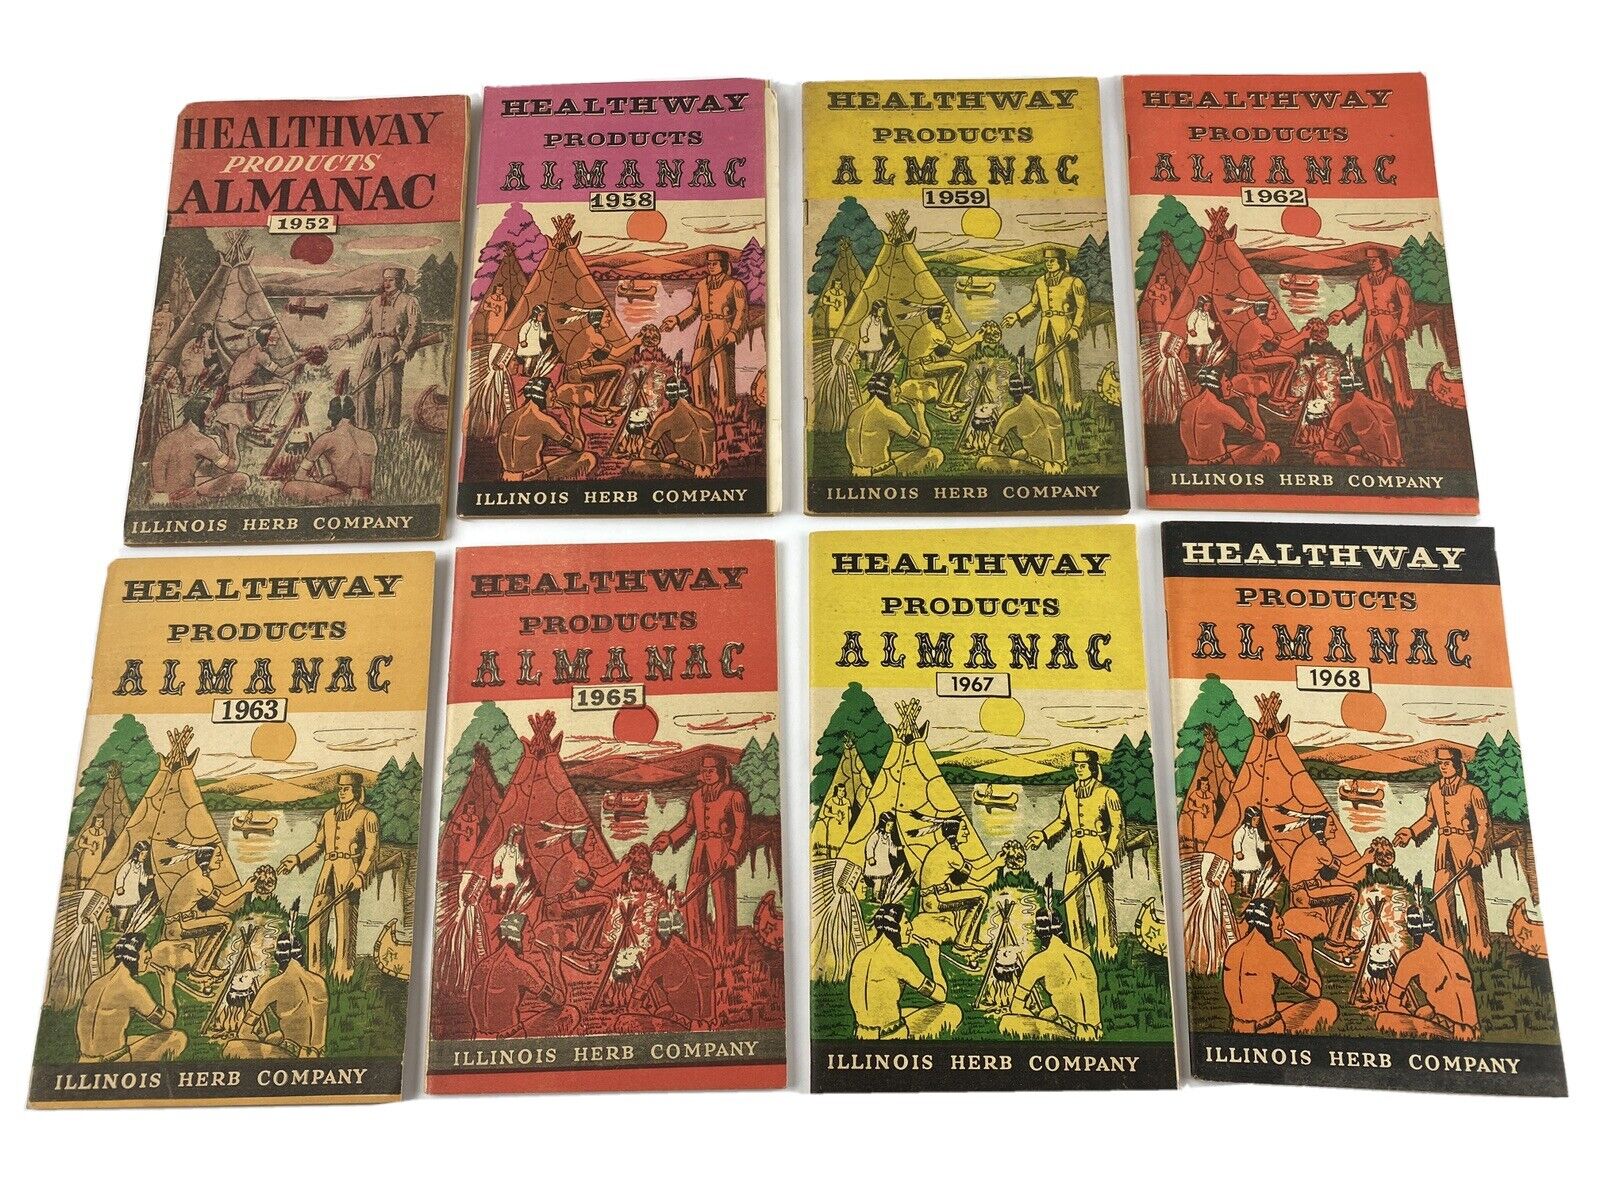 Healthway Products Almanac - 8 Booklets 1952-1968, Illinois Herb Company